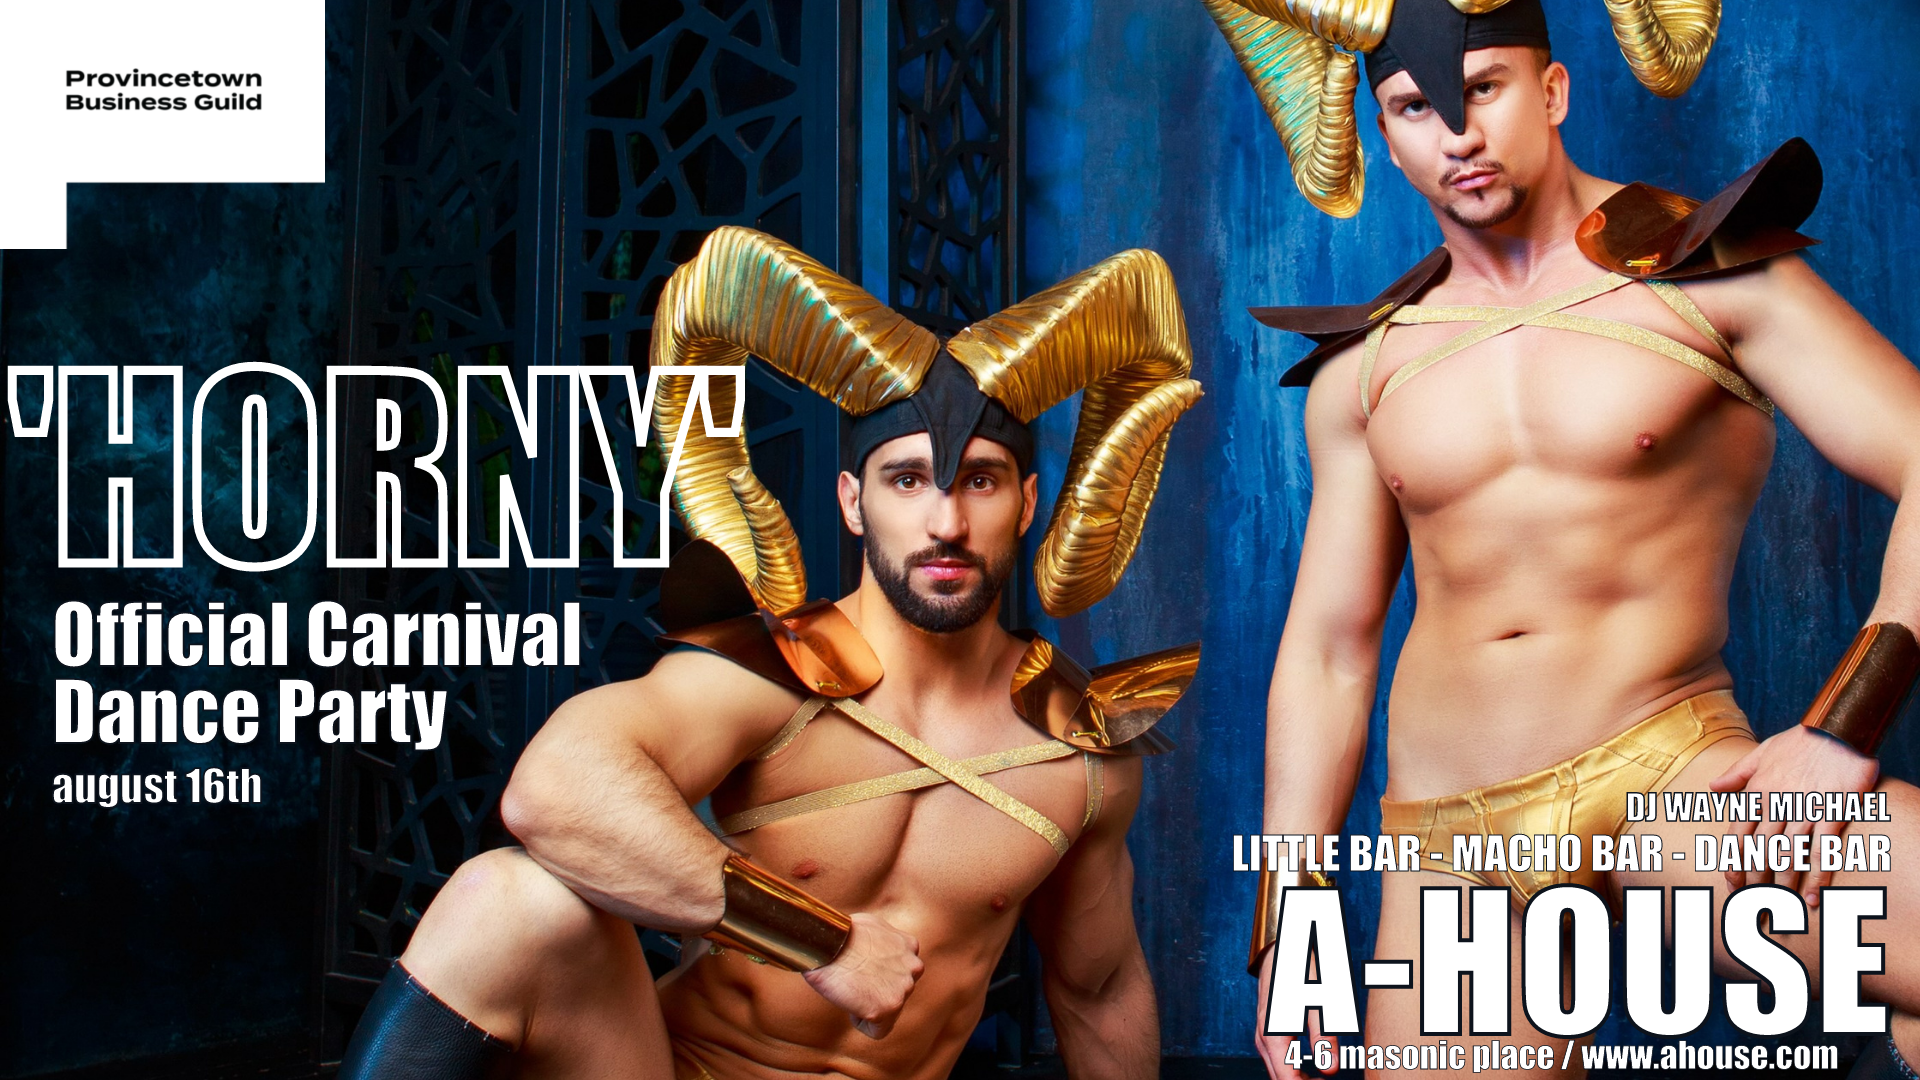 HORNY' – Official Carnival Dance Party – Provincetown Business Guild